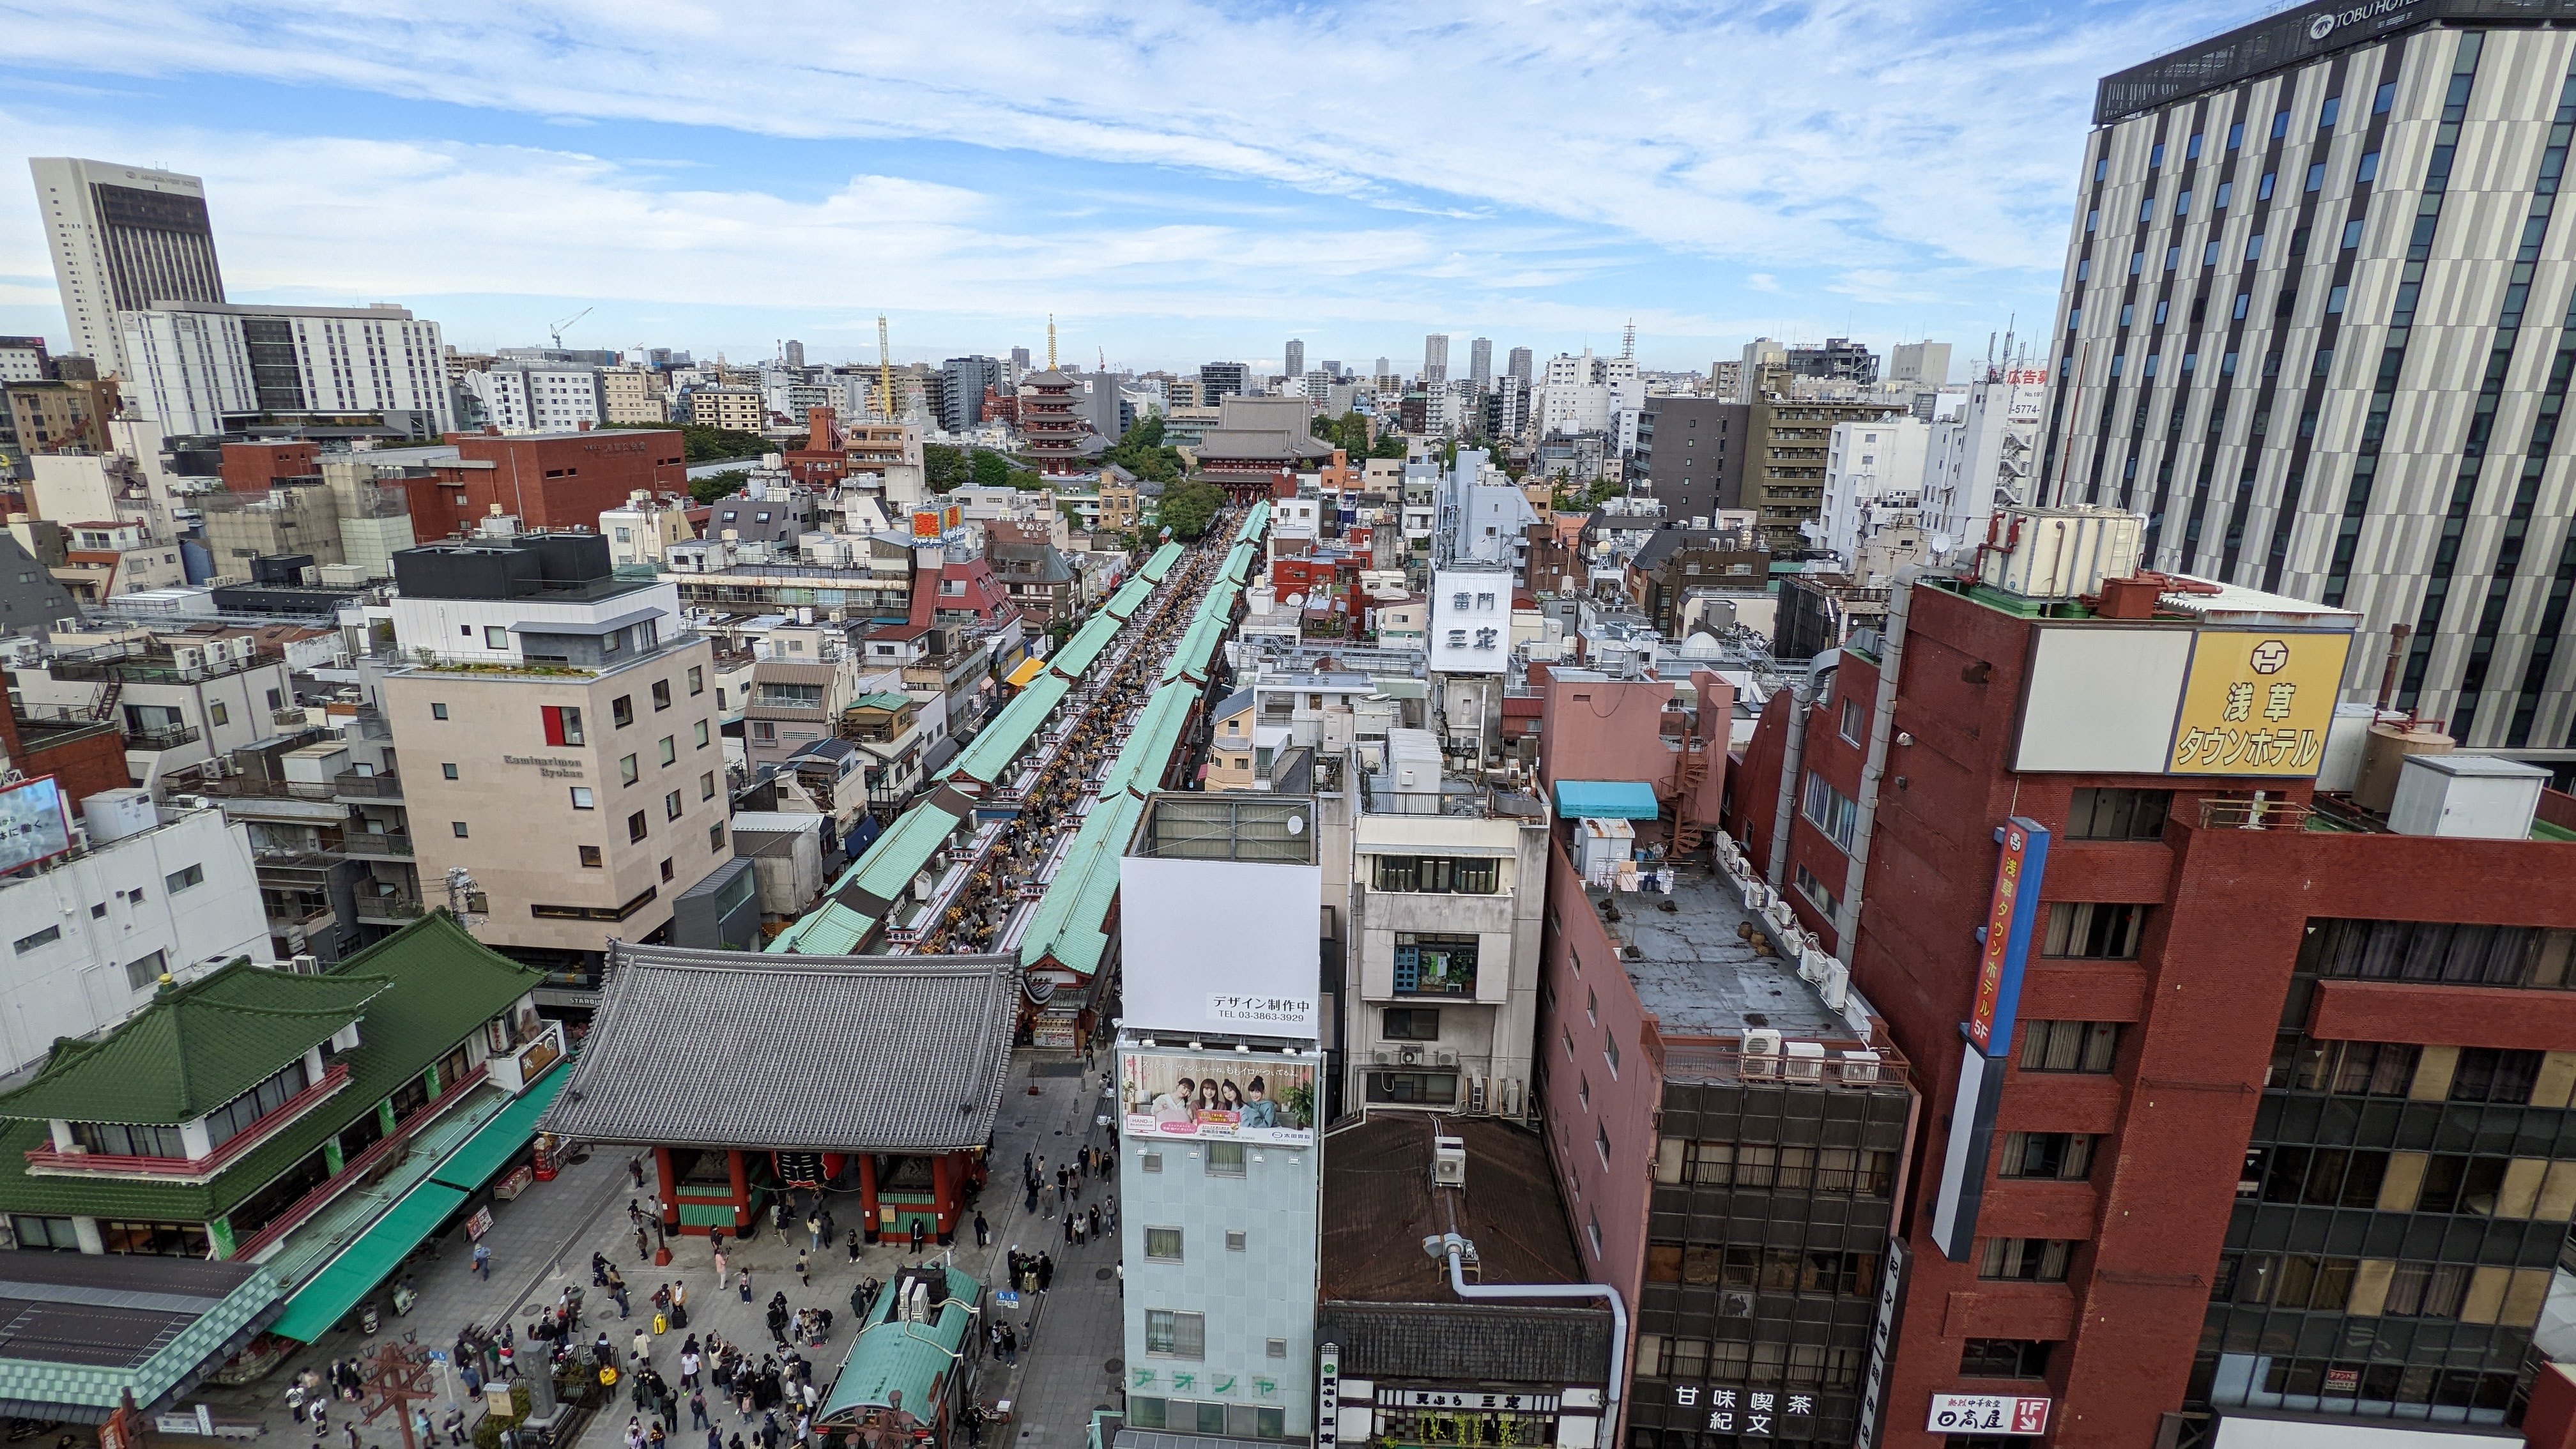 View from the rooftop of Asakusa Culture Tourist Information Center